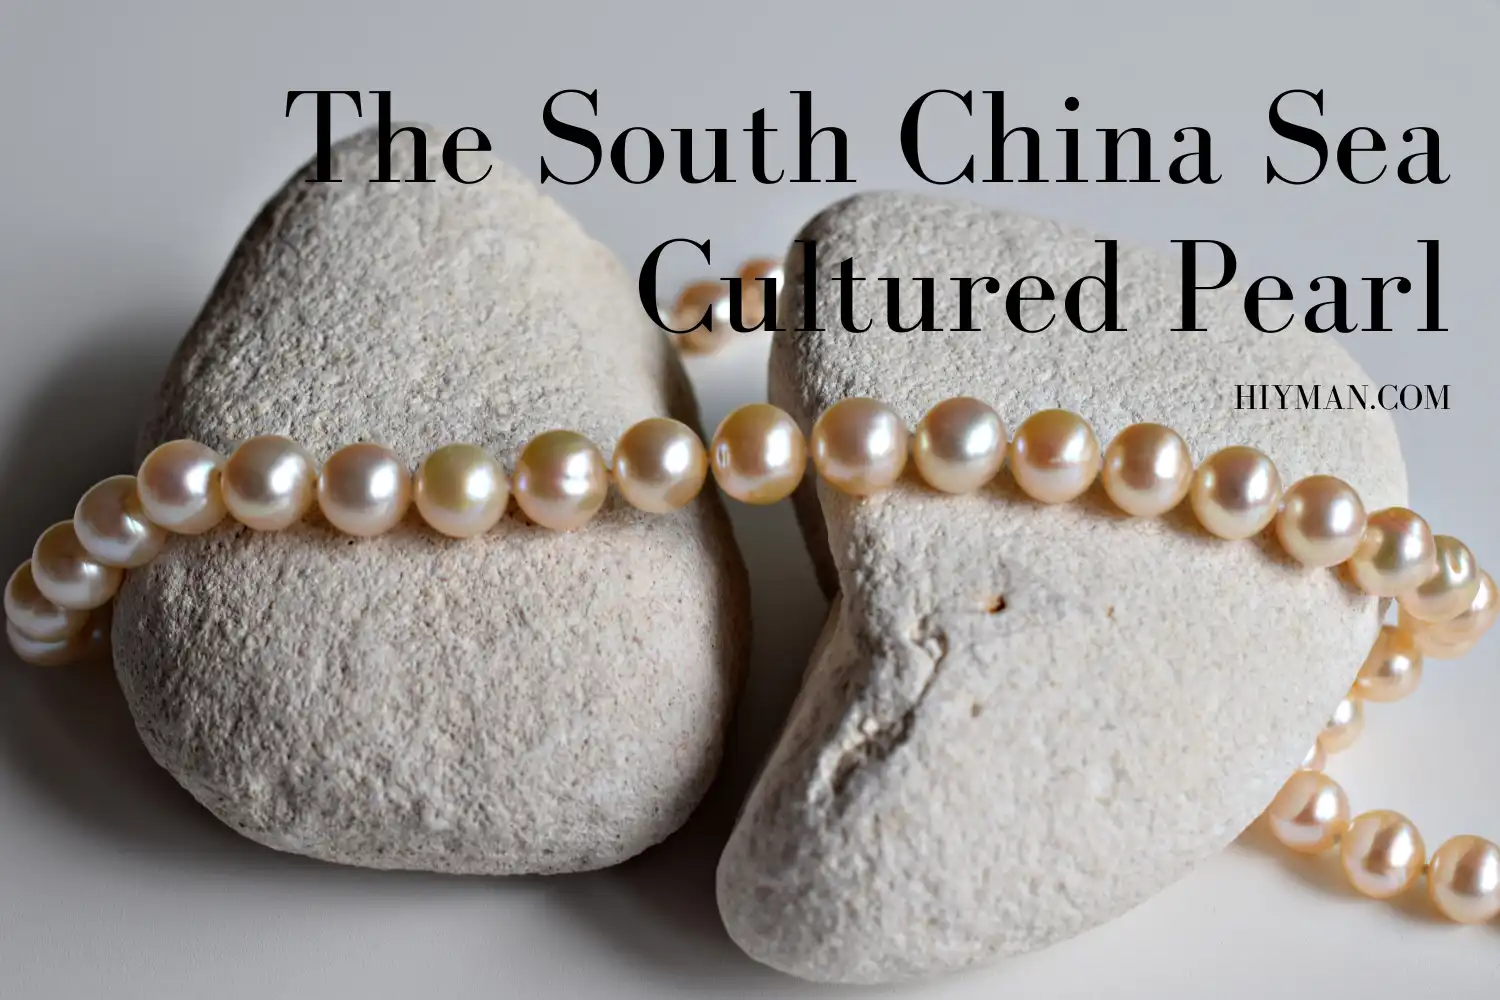 The South China Sea Cultured Pearls